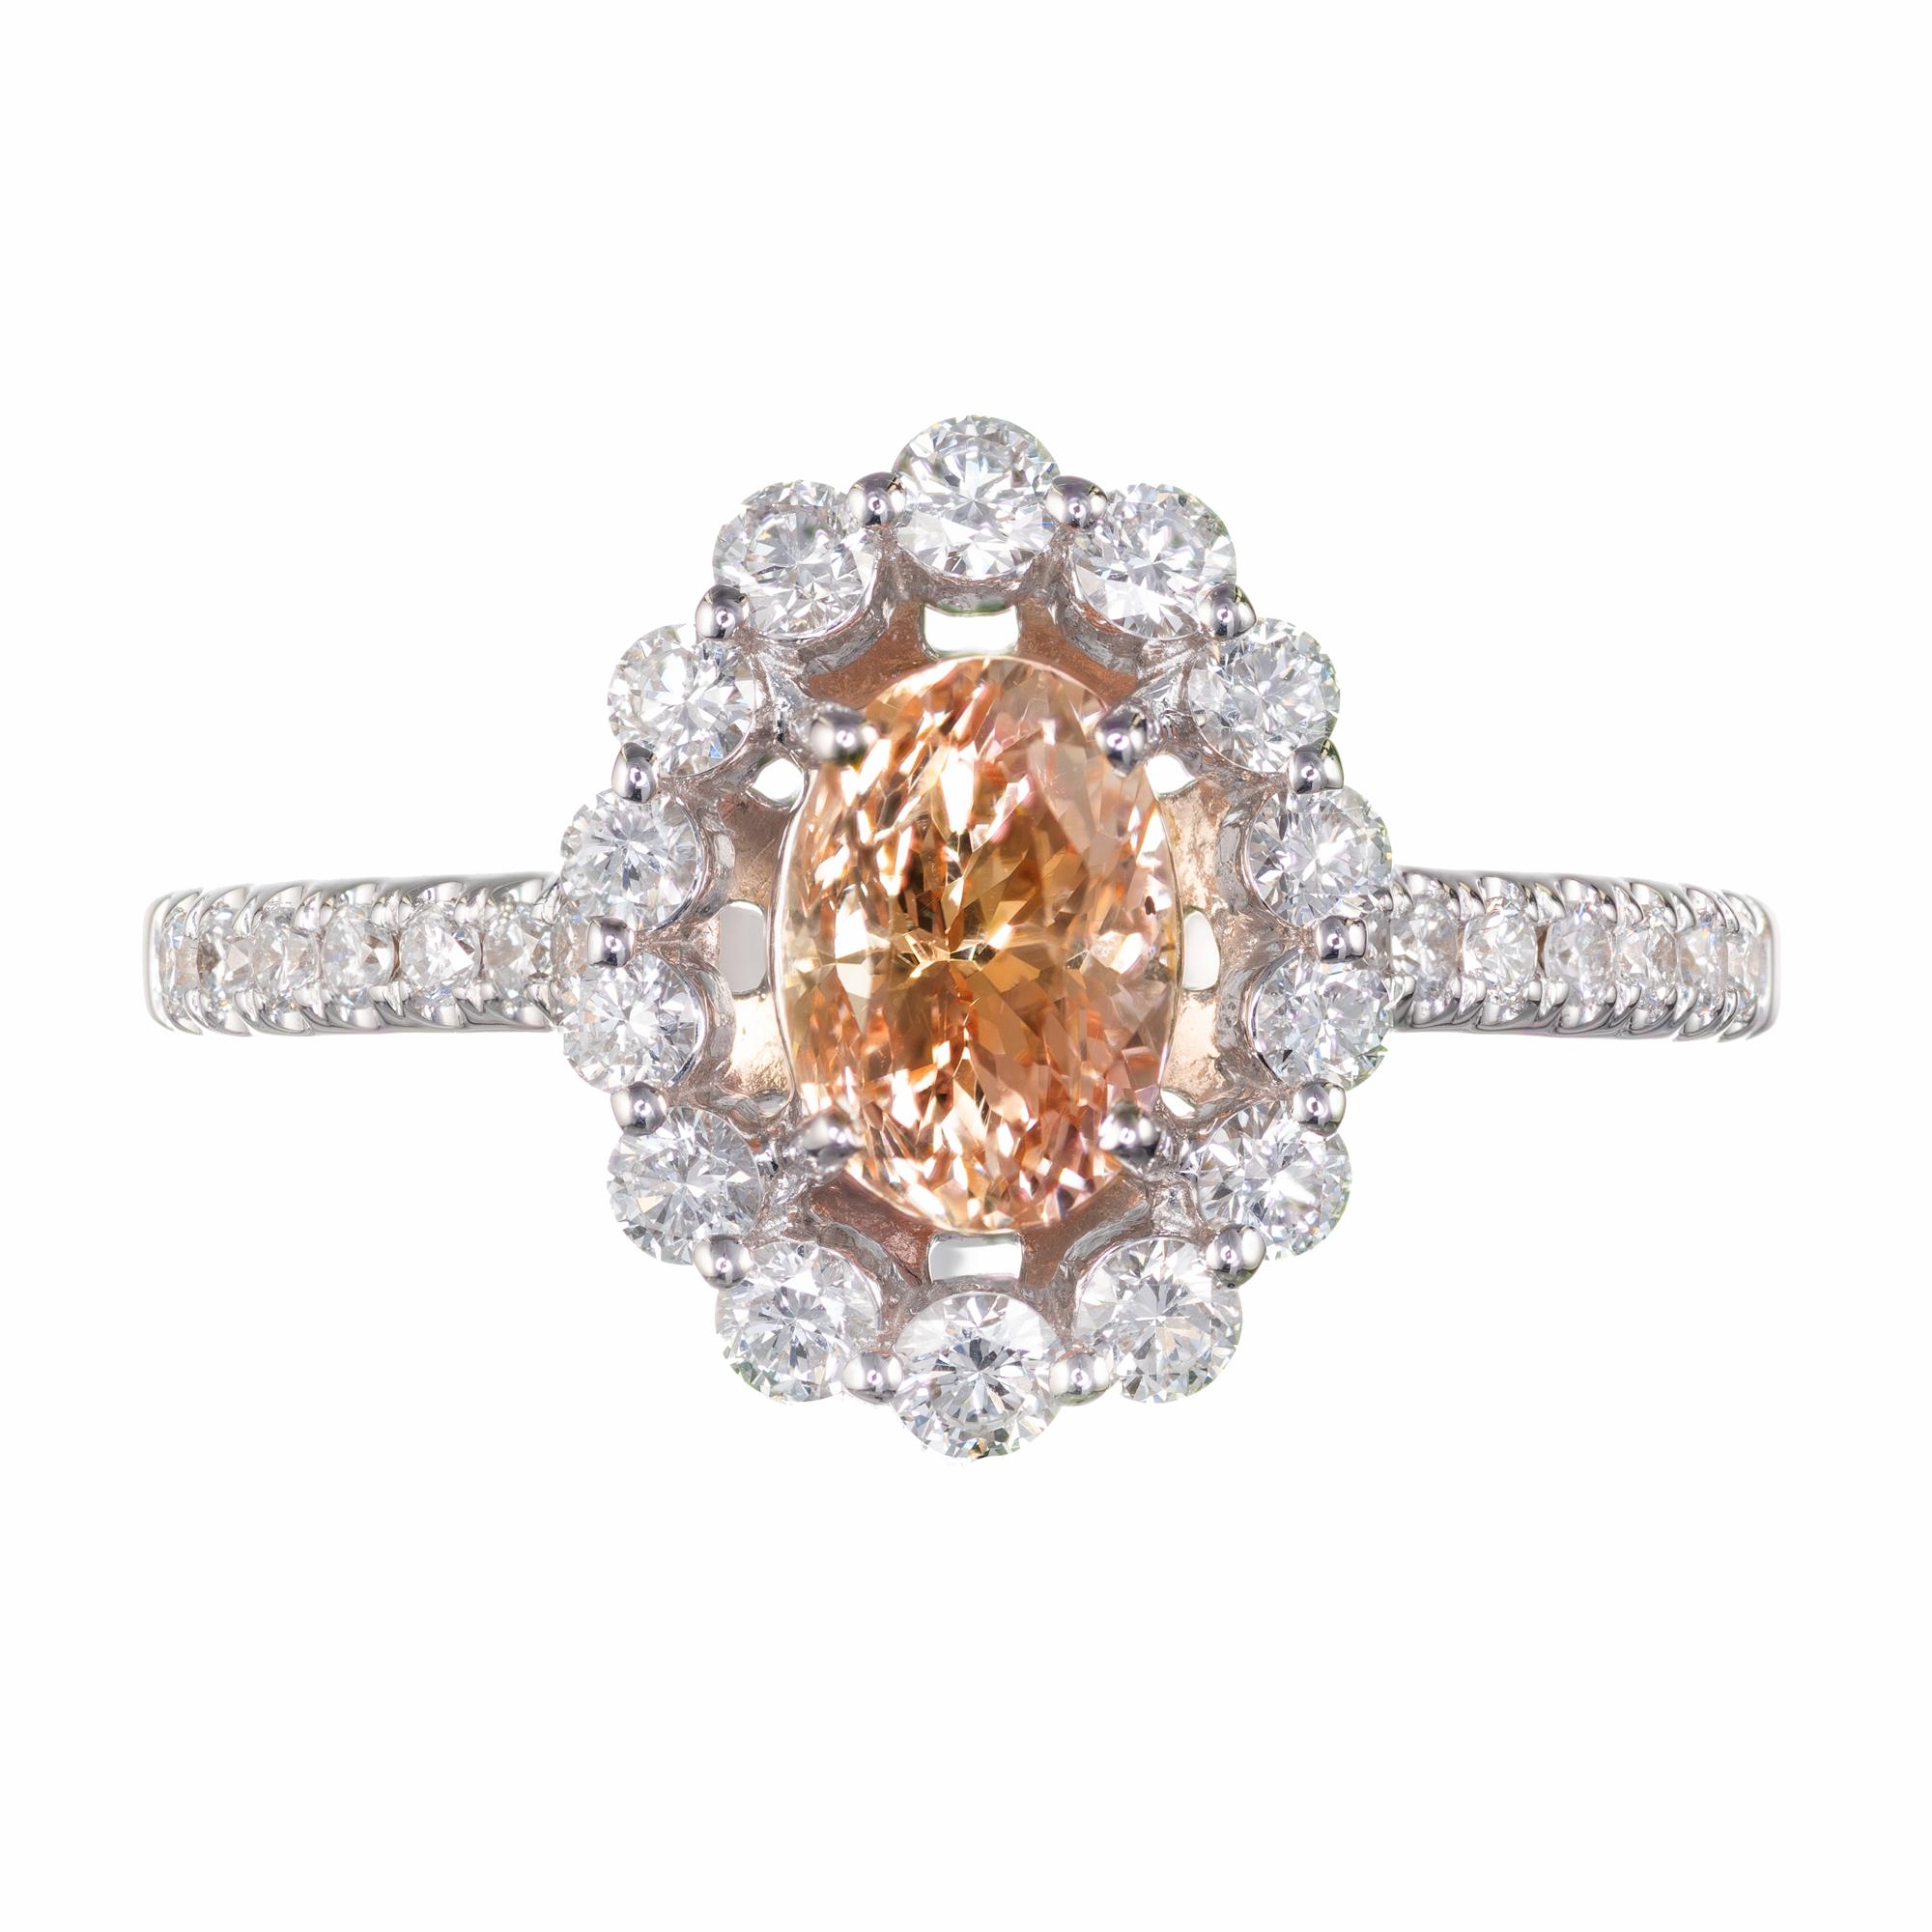 Natural untreated Padparadscha sapphire an diamond engagement ring.  Oval 1.06 carat GIA certified center sapphire with a diamond halo. 18k white gold setting designed and crafted in the Peter Suchy Jewelers Workshop. The sapphire is from an estate